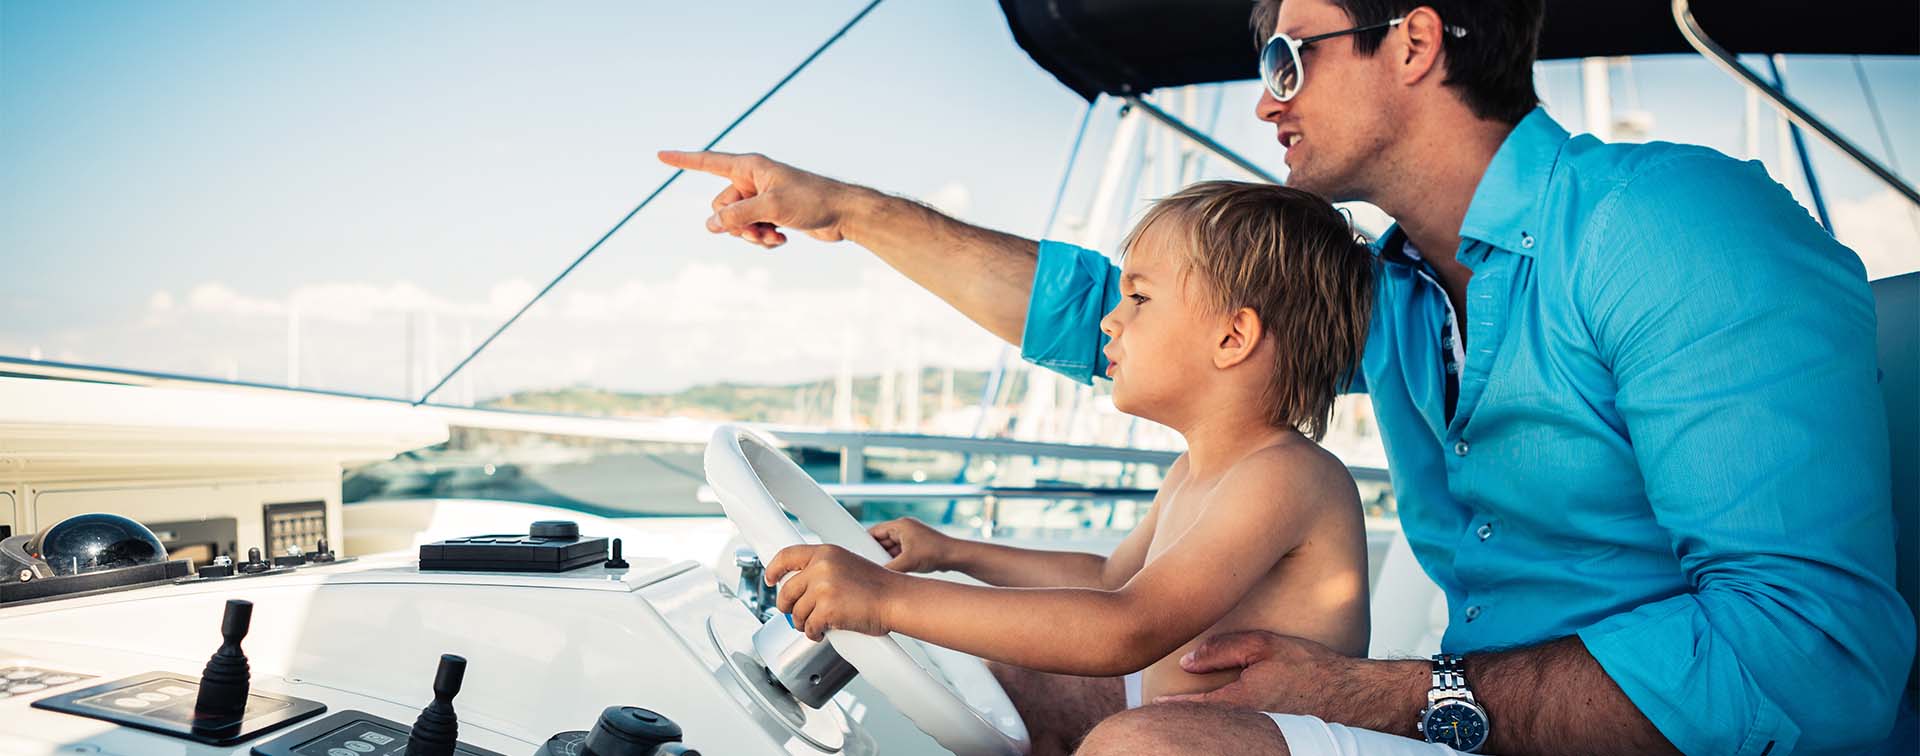 A man on a boat pointing at the distance, with his young son at his lap and holding the steering wheel